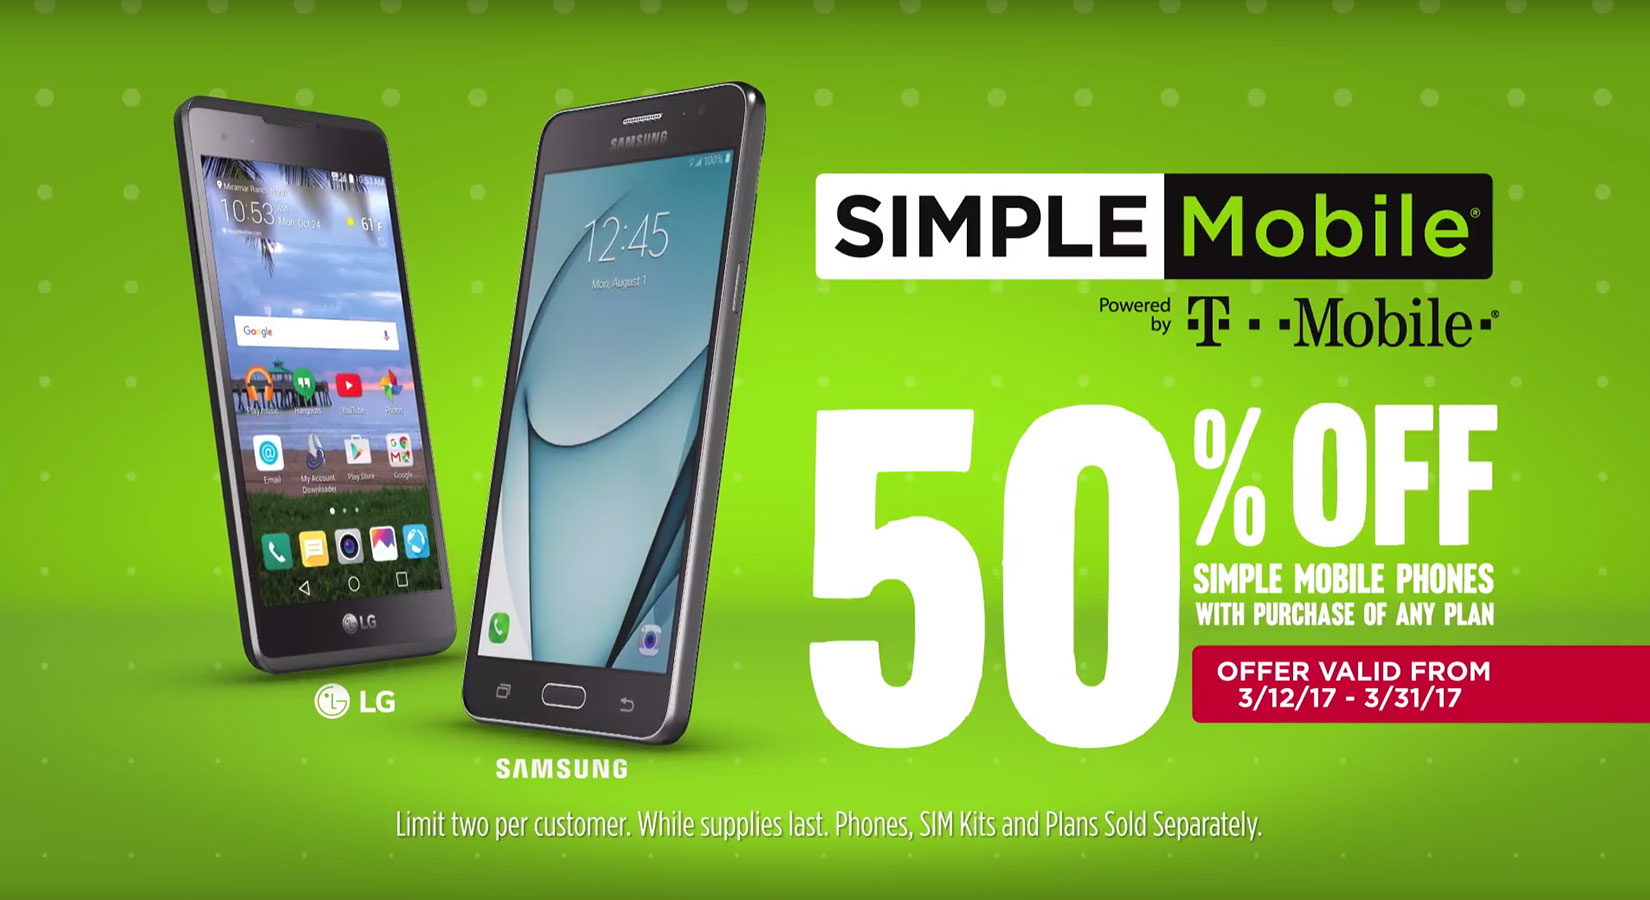 Simple Mobile "Phones at 50% Off"